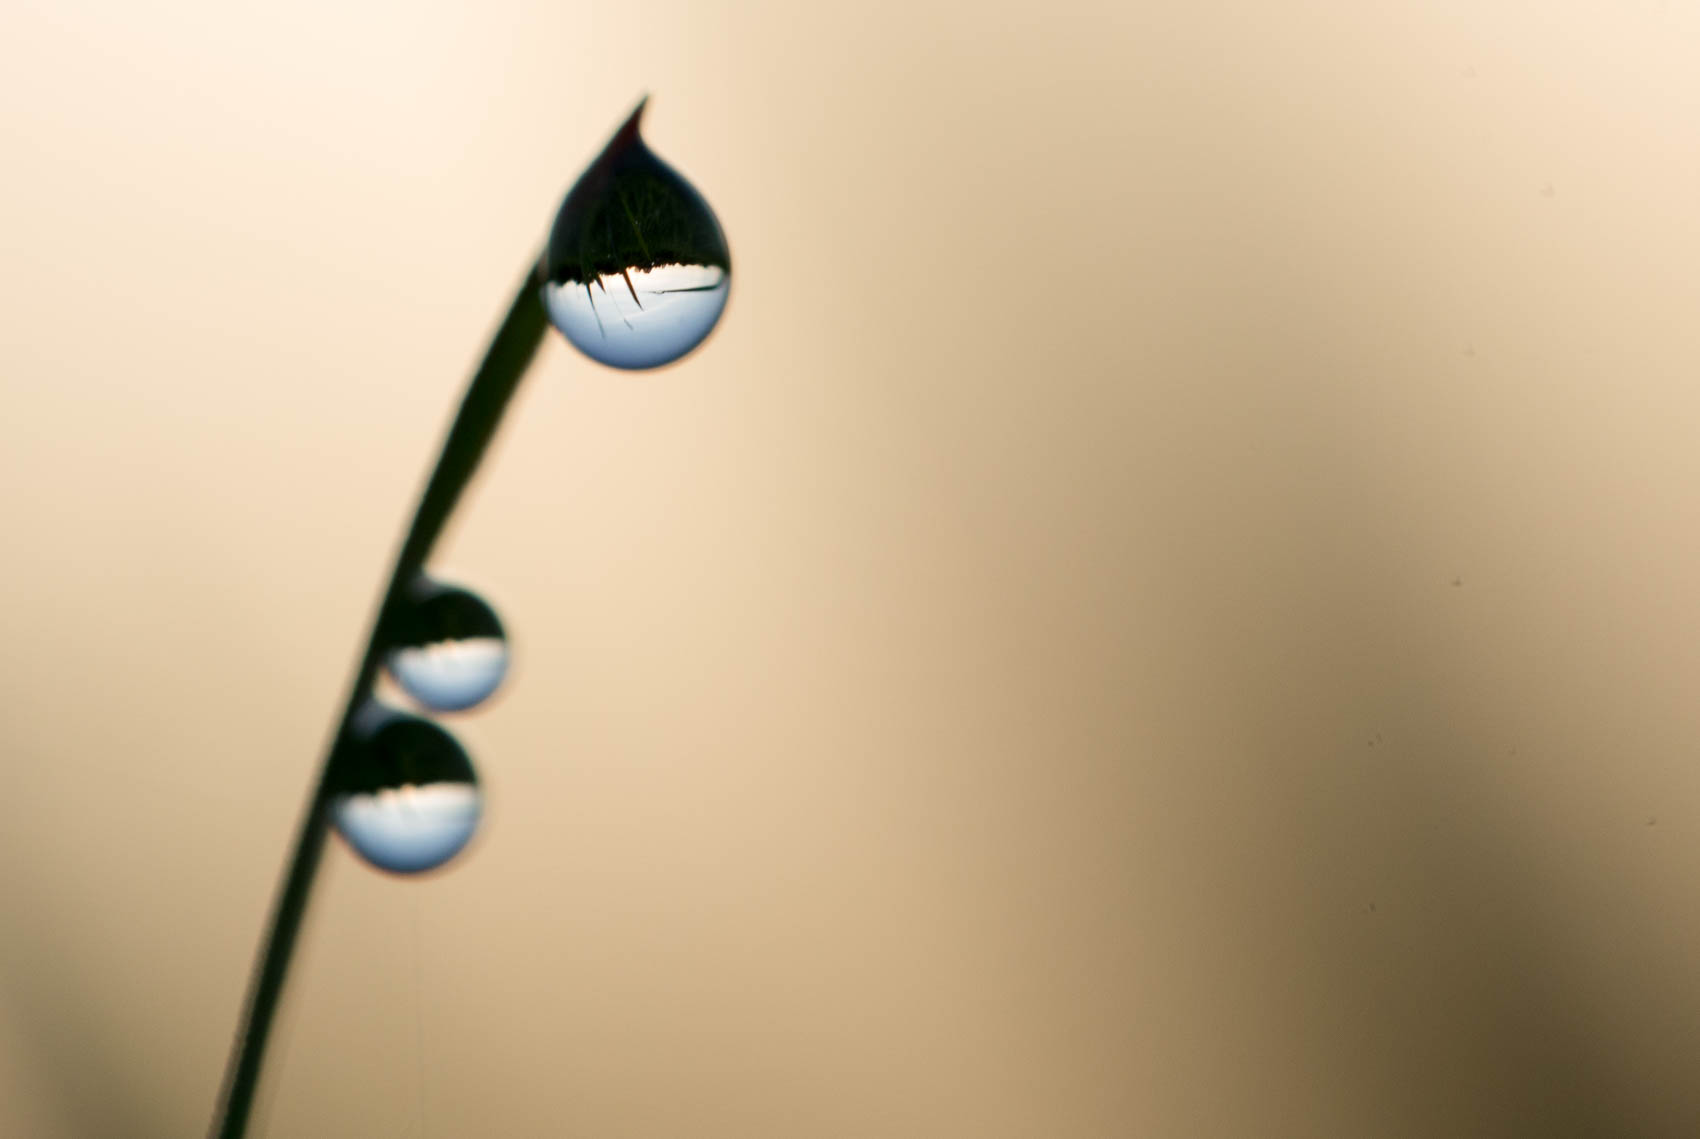 Droplets forming lenses with image of horizon.